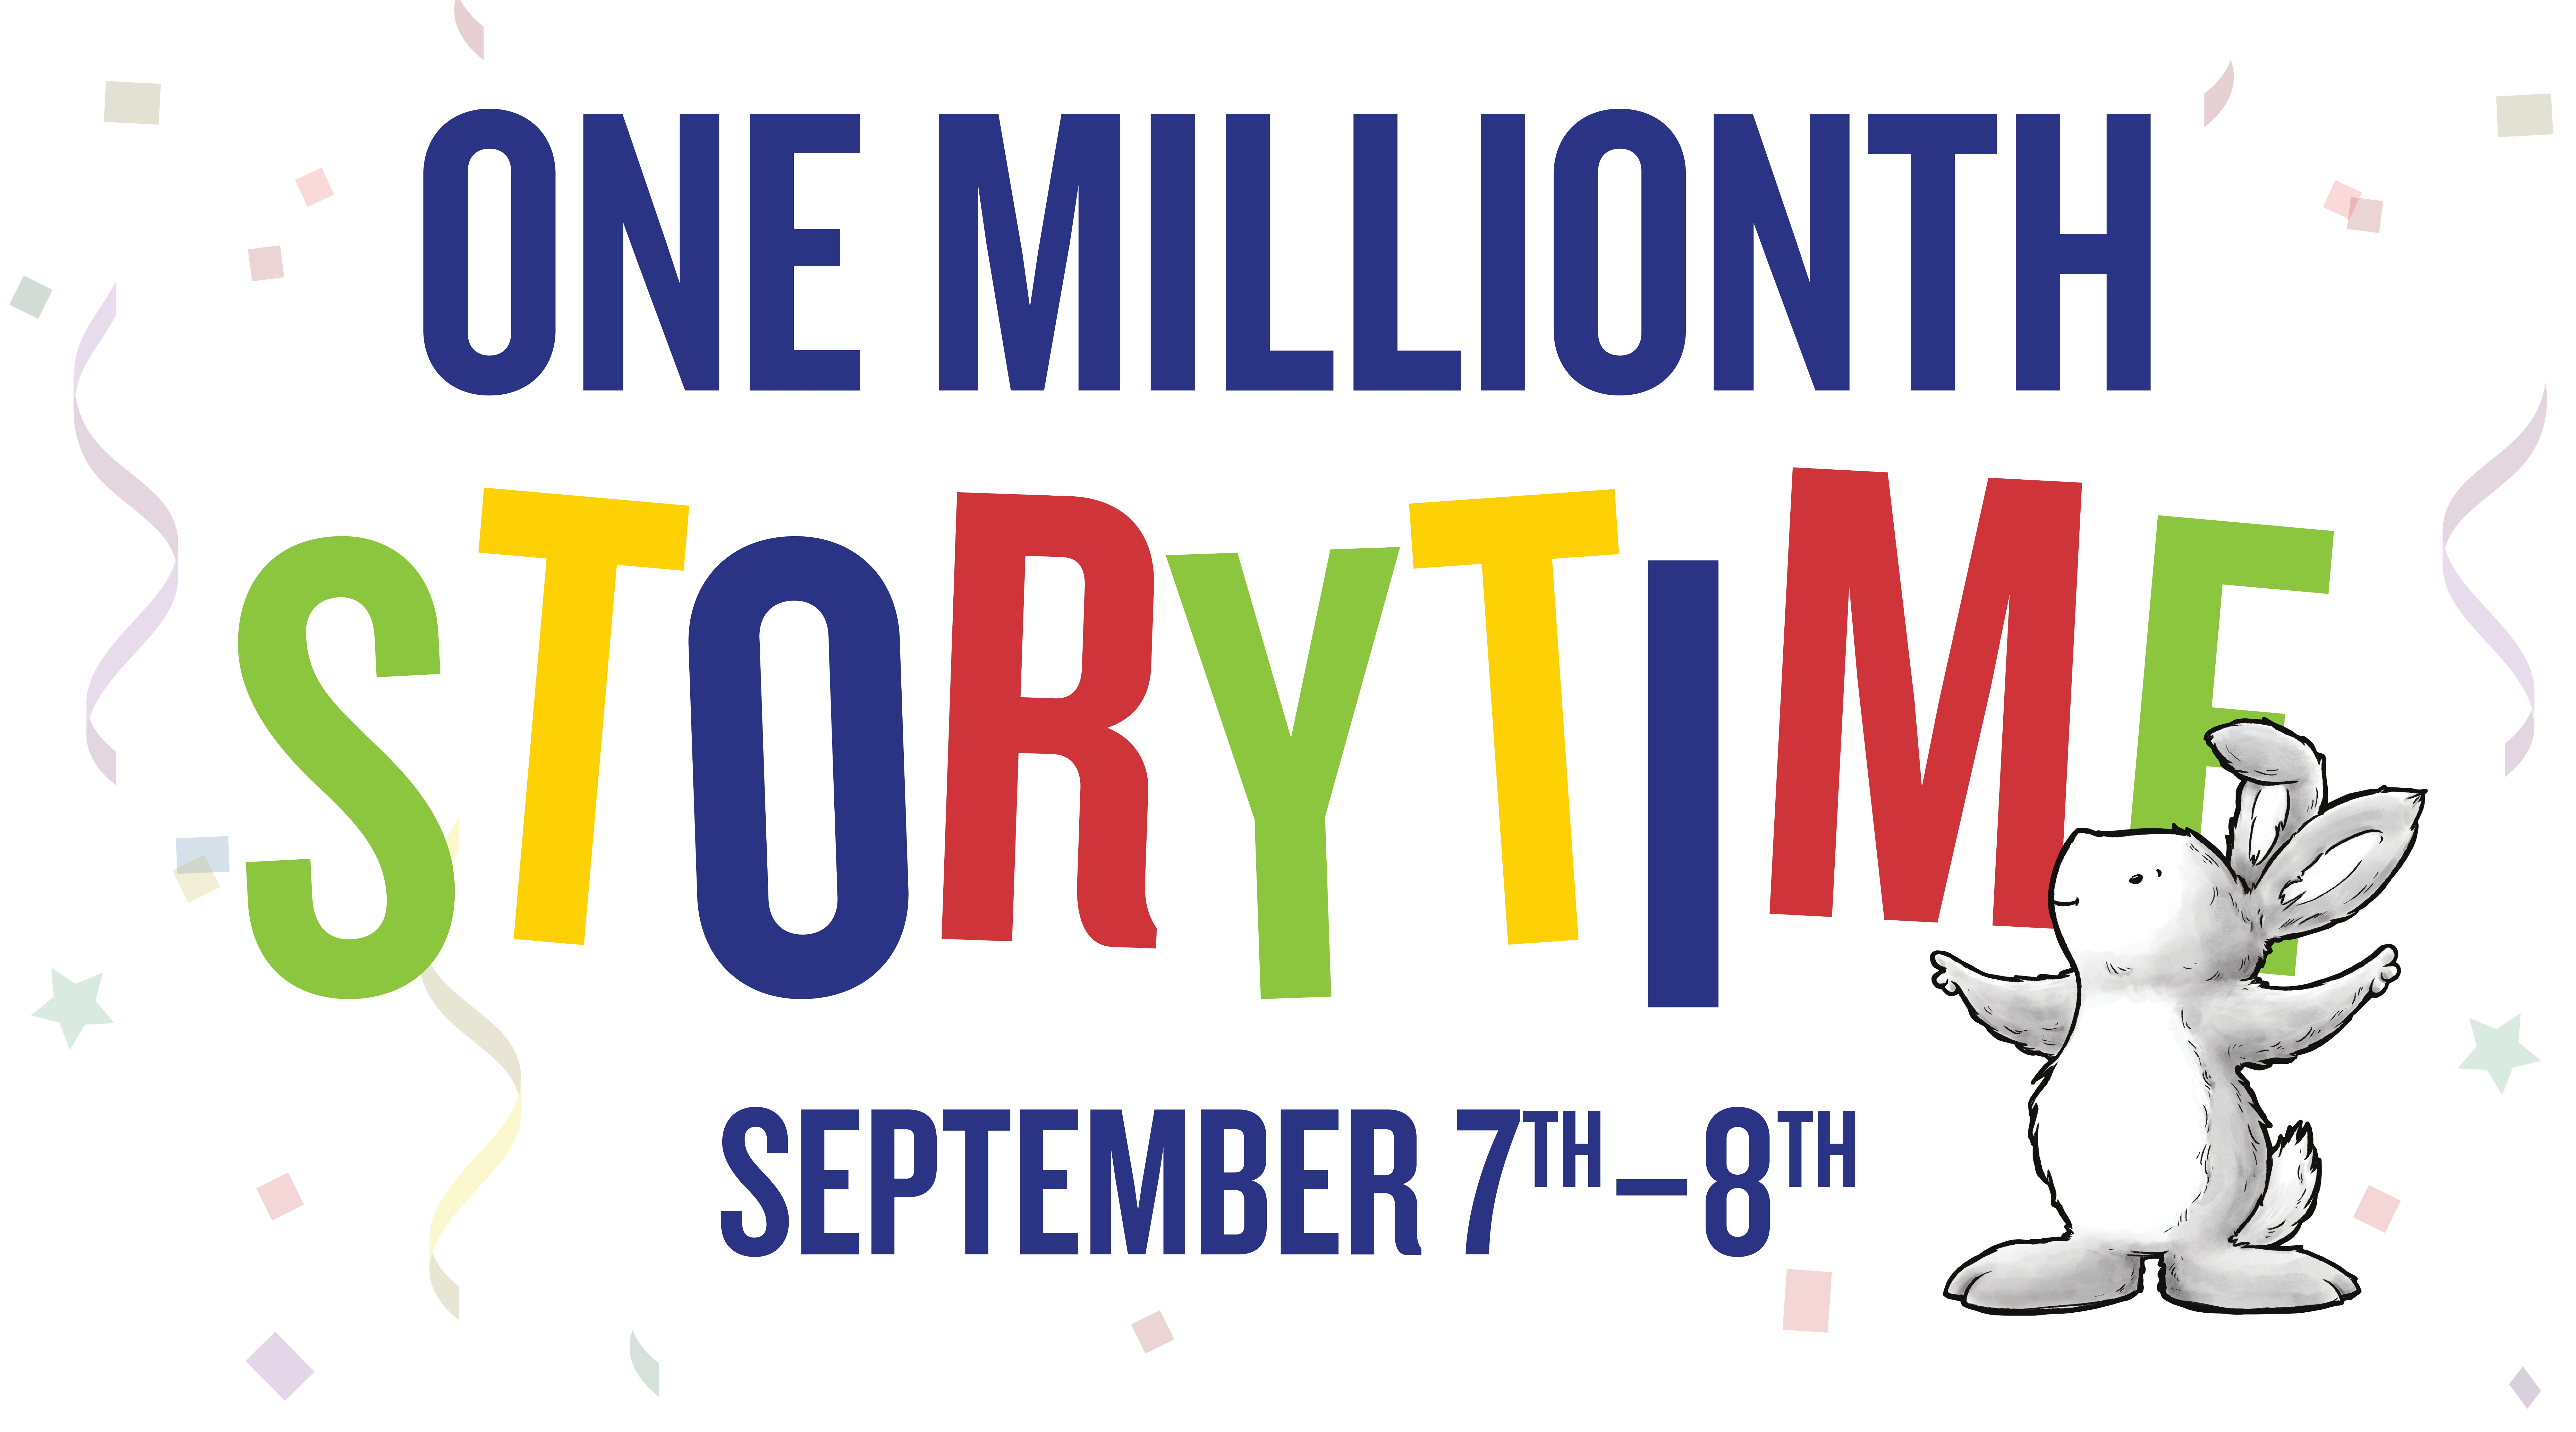 One Millionth Storytime